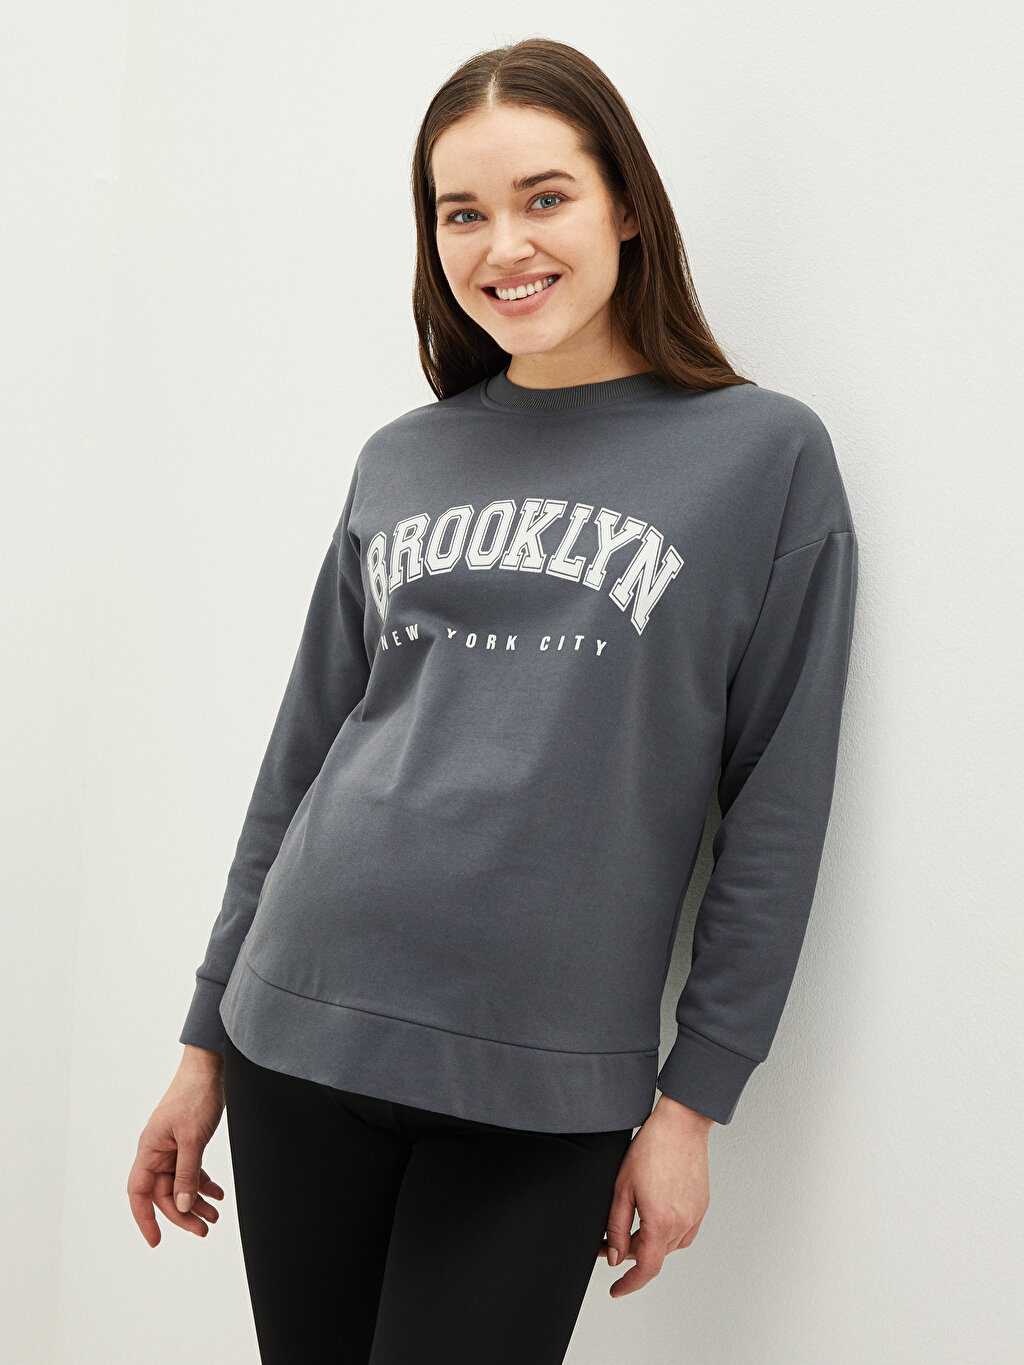 Crew Neck Letter Printed Long Sleeve Maternity Sweatshirt -S2FQ17Z8-HLC -  S2FQ17Z8-HLC - LC Waikiki